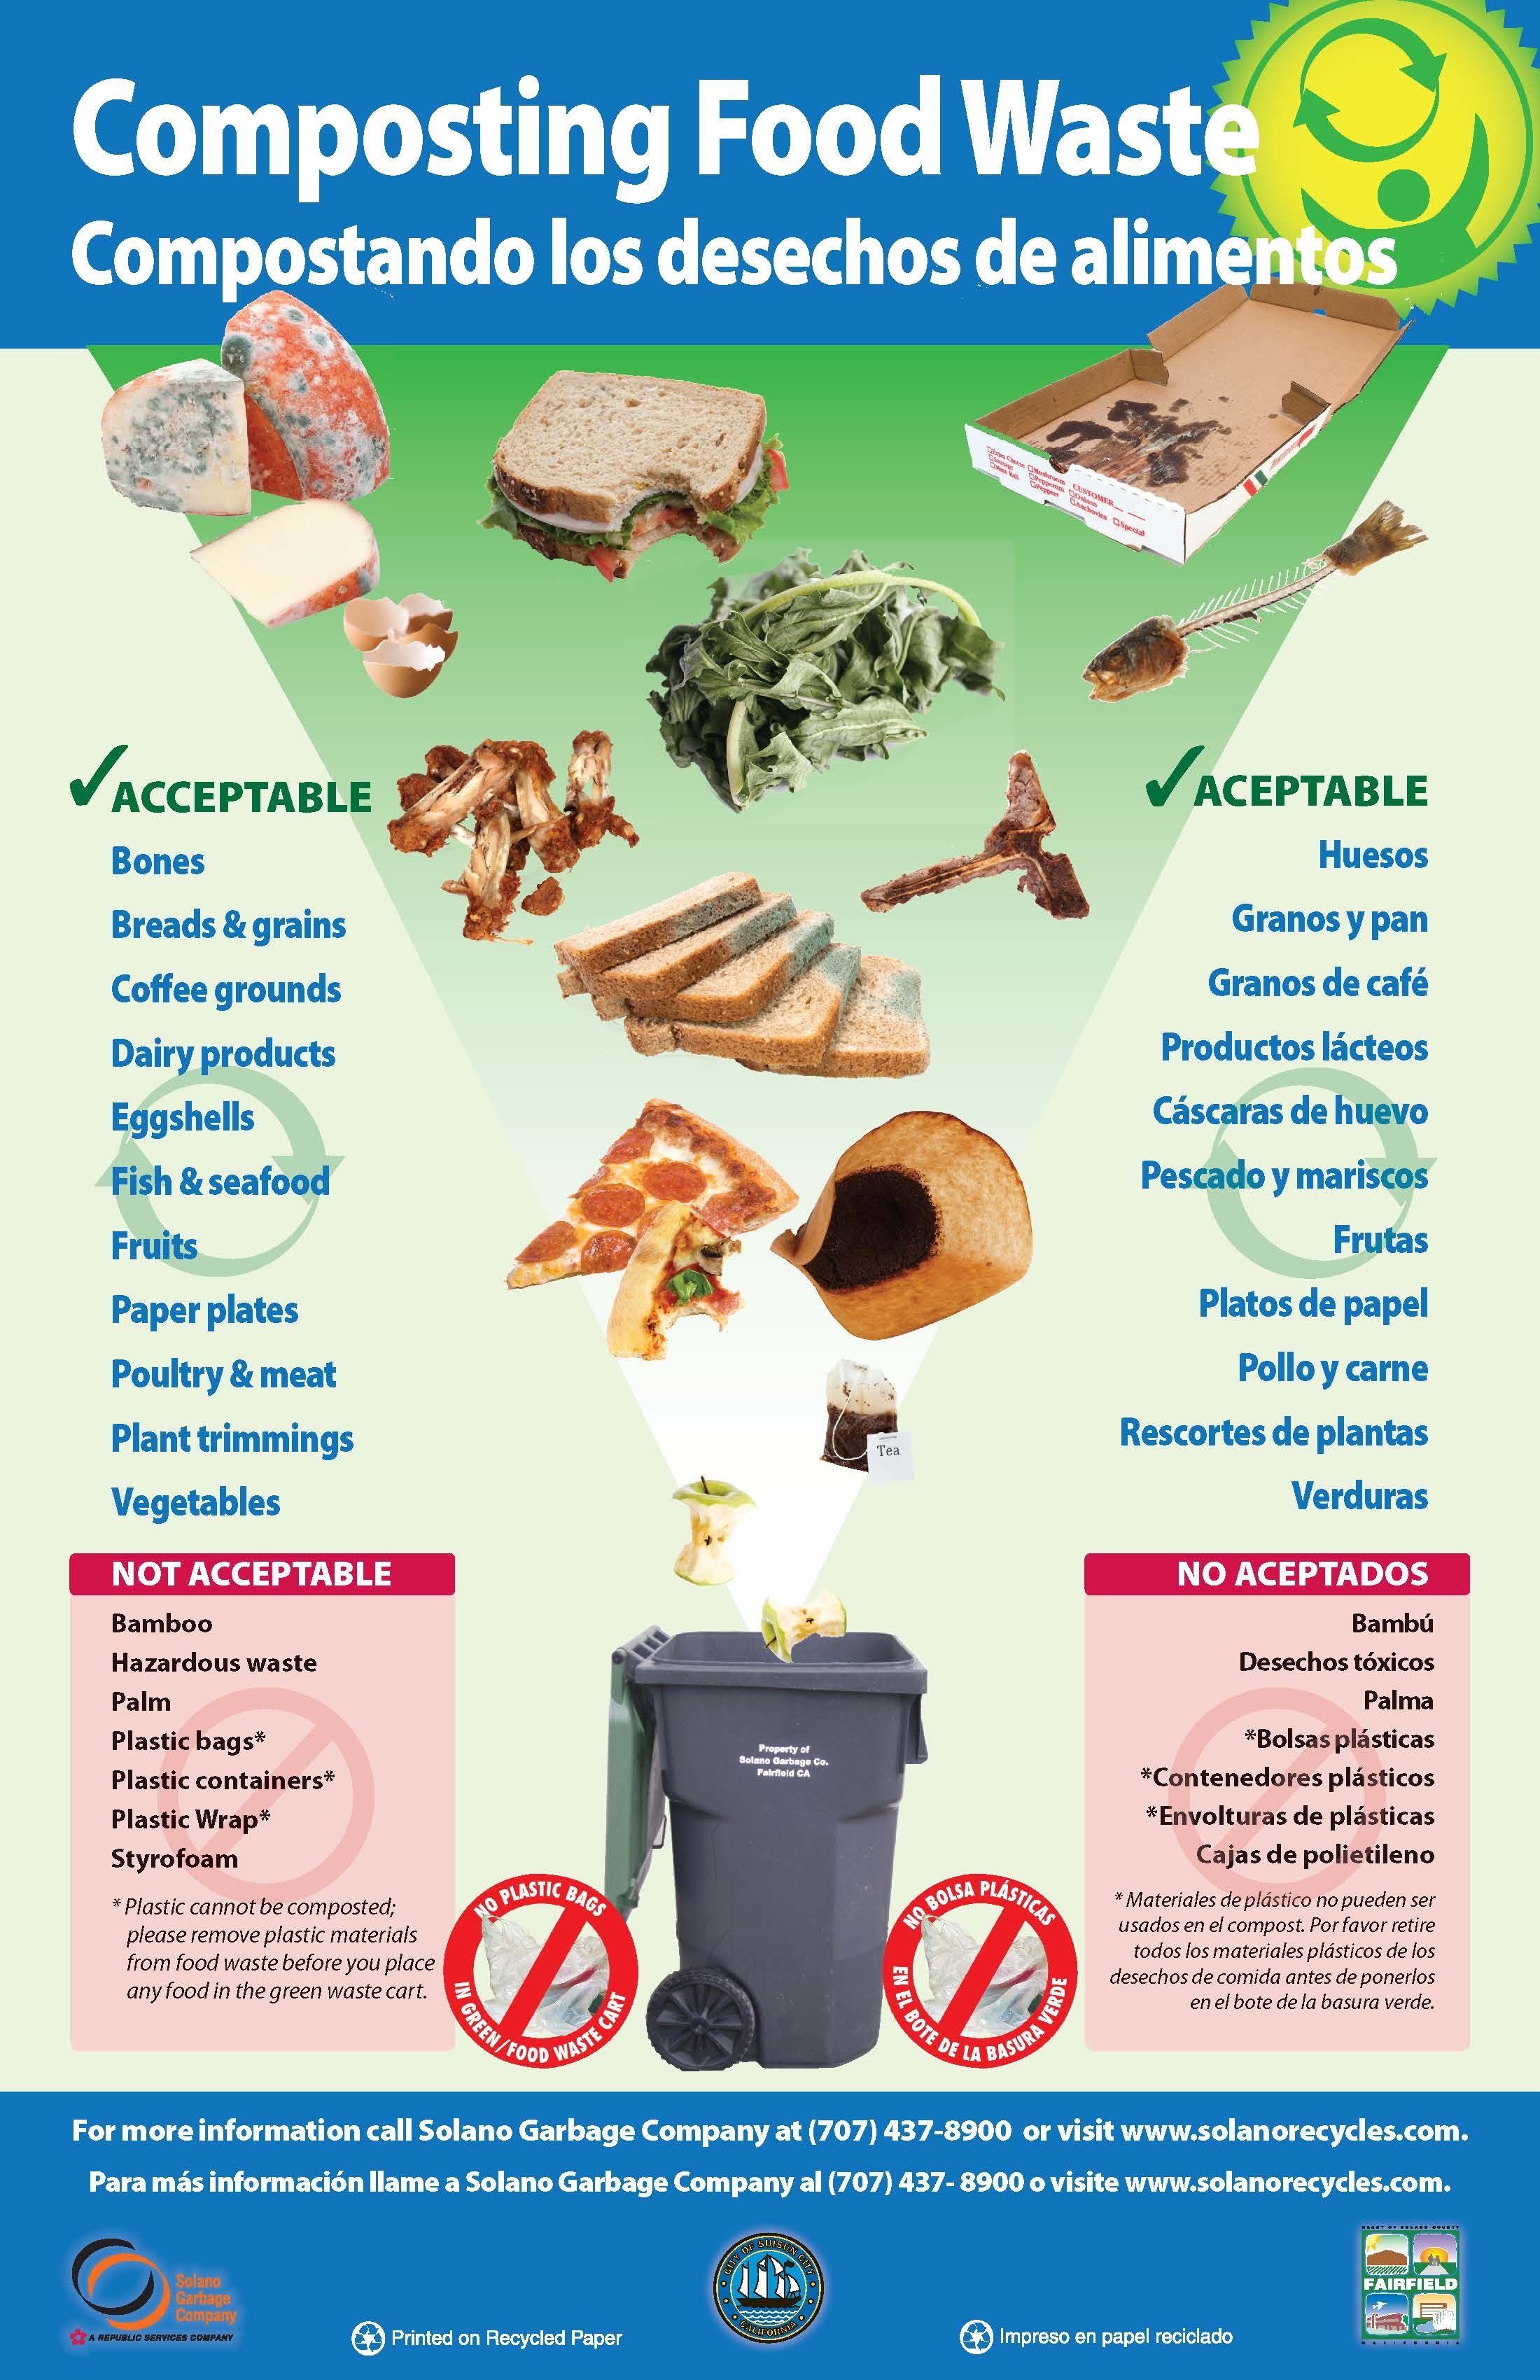 How to compost: Don't waste your waste, Fruits & Vegetables